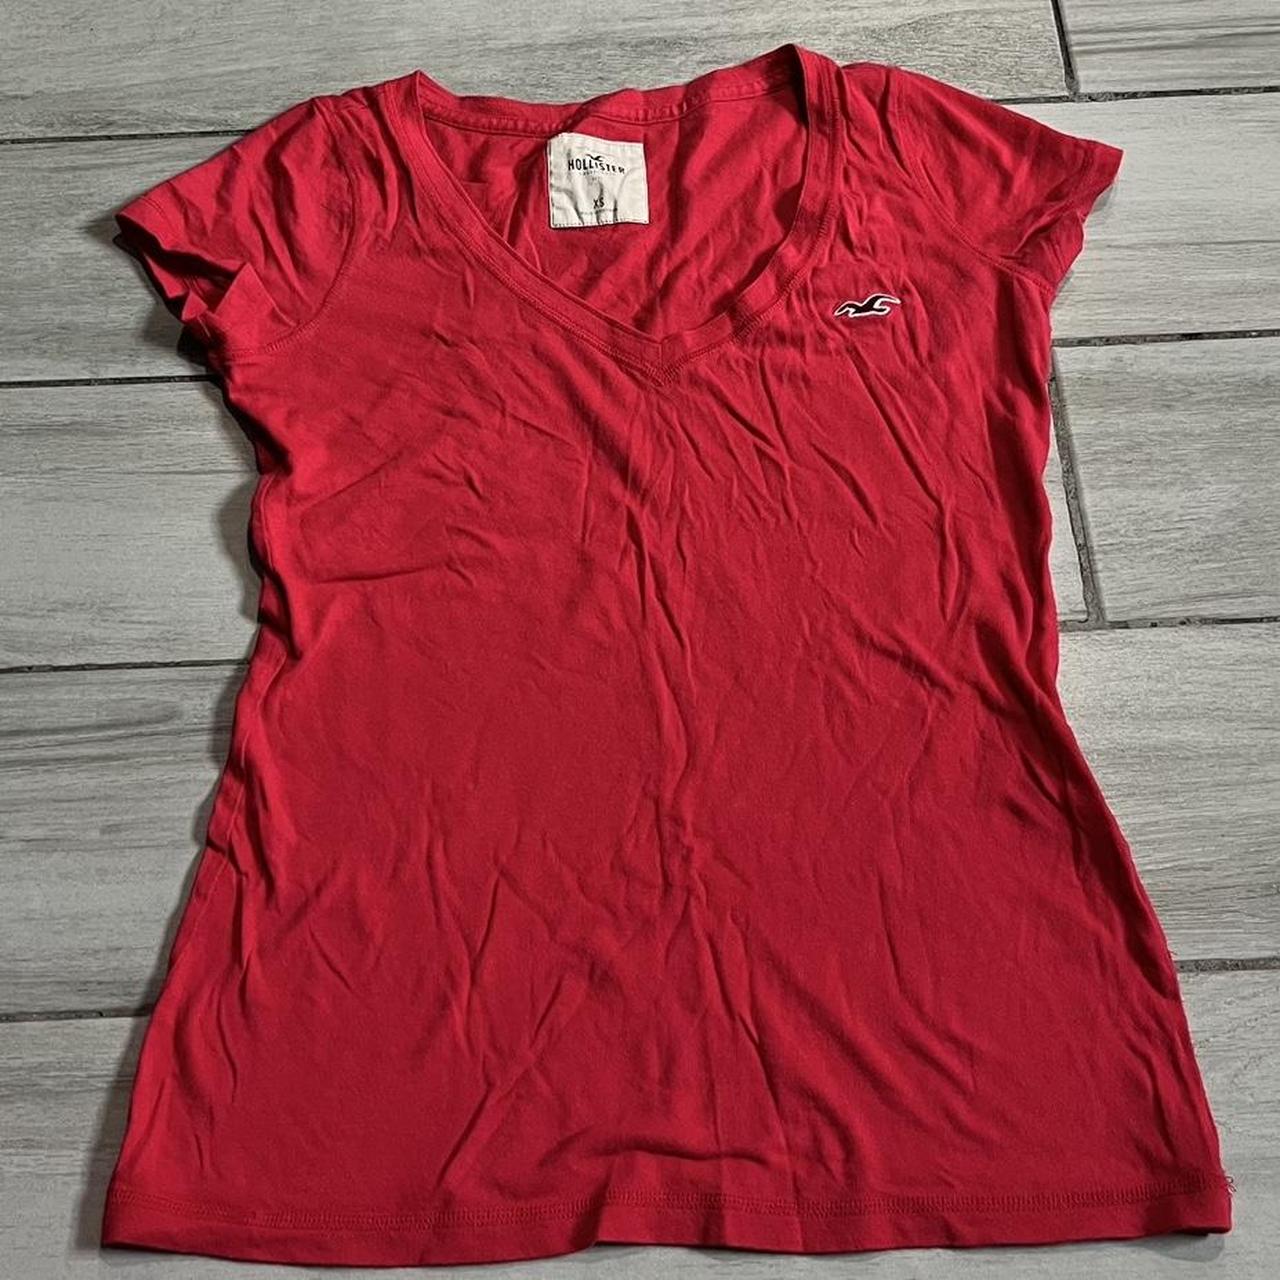 Red and White Hollister Co. SoCal / California Shirt - Depop